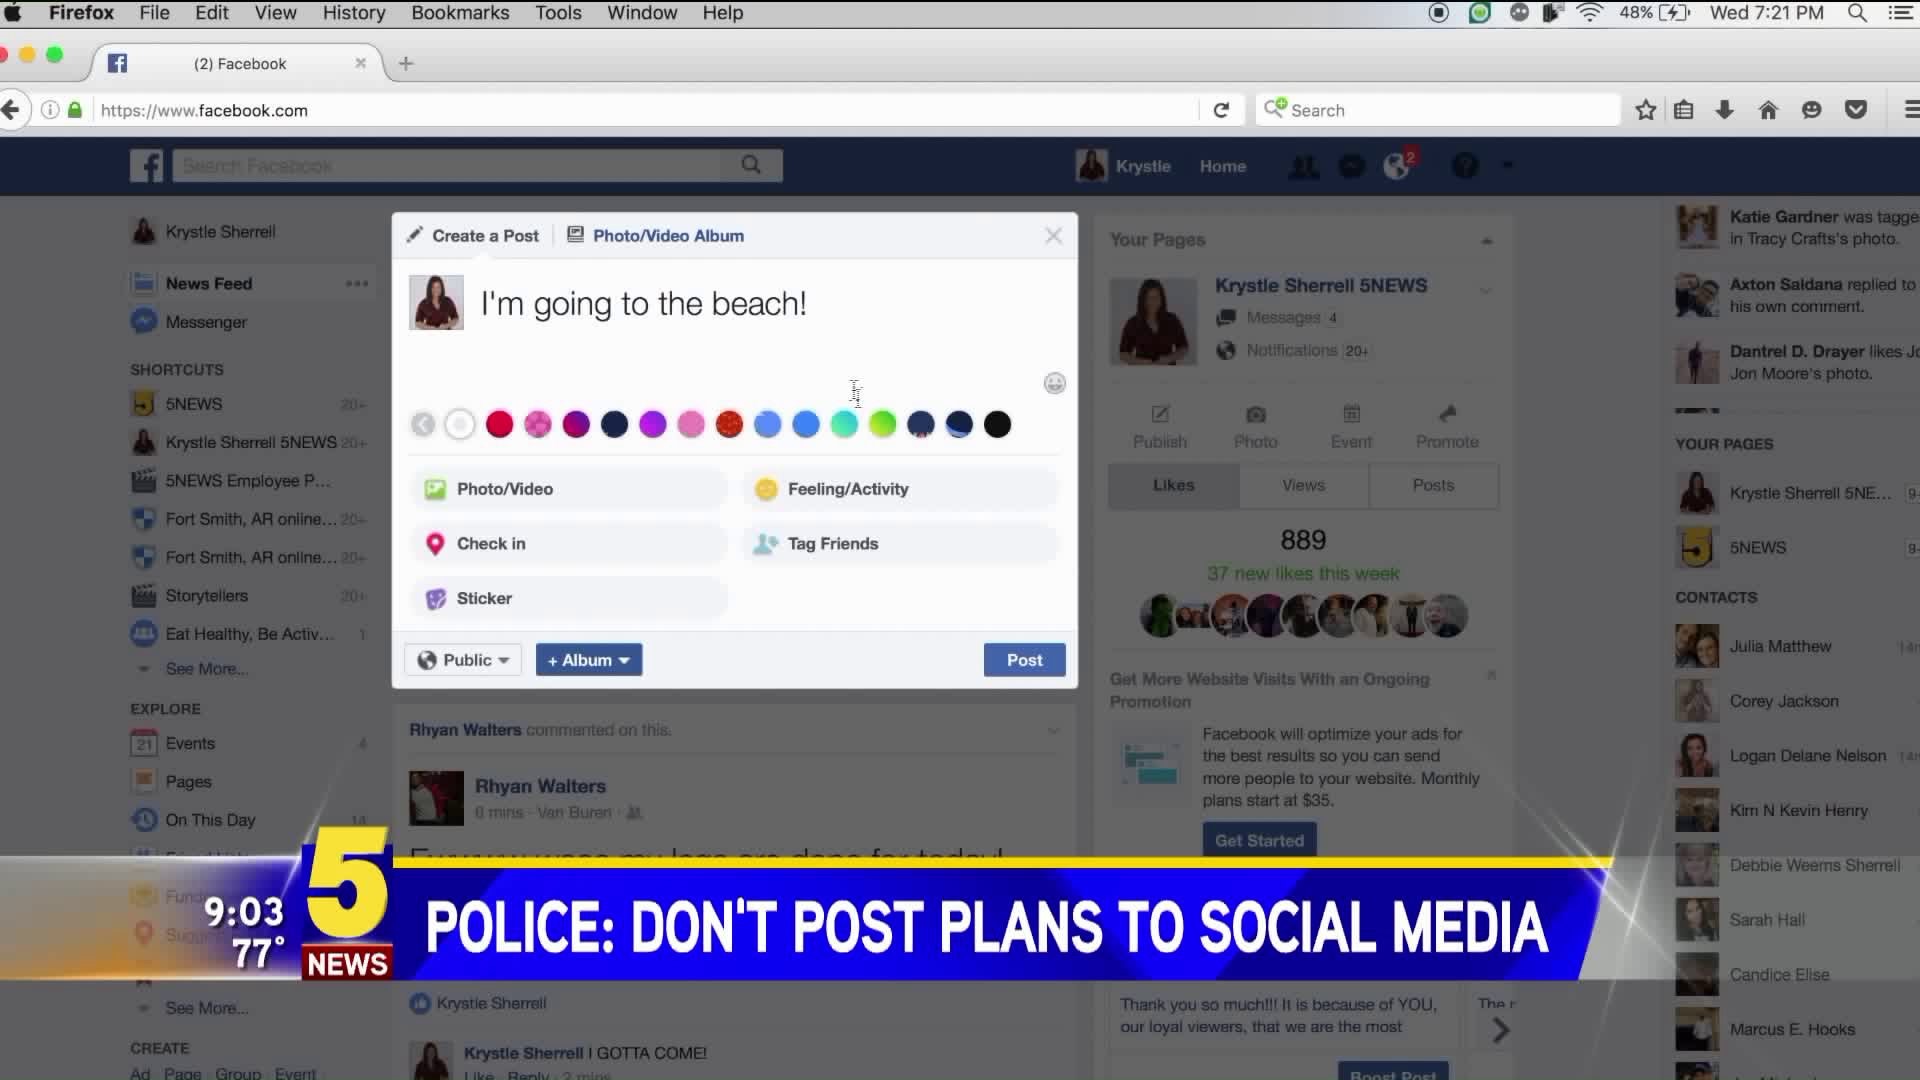 Police Say Not To Post Plans To Social Media